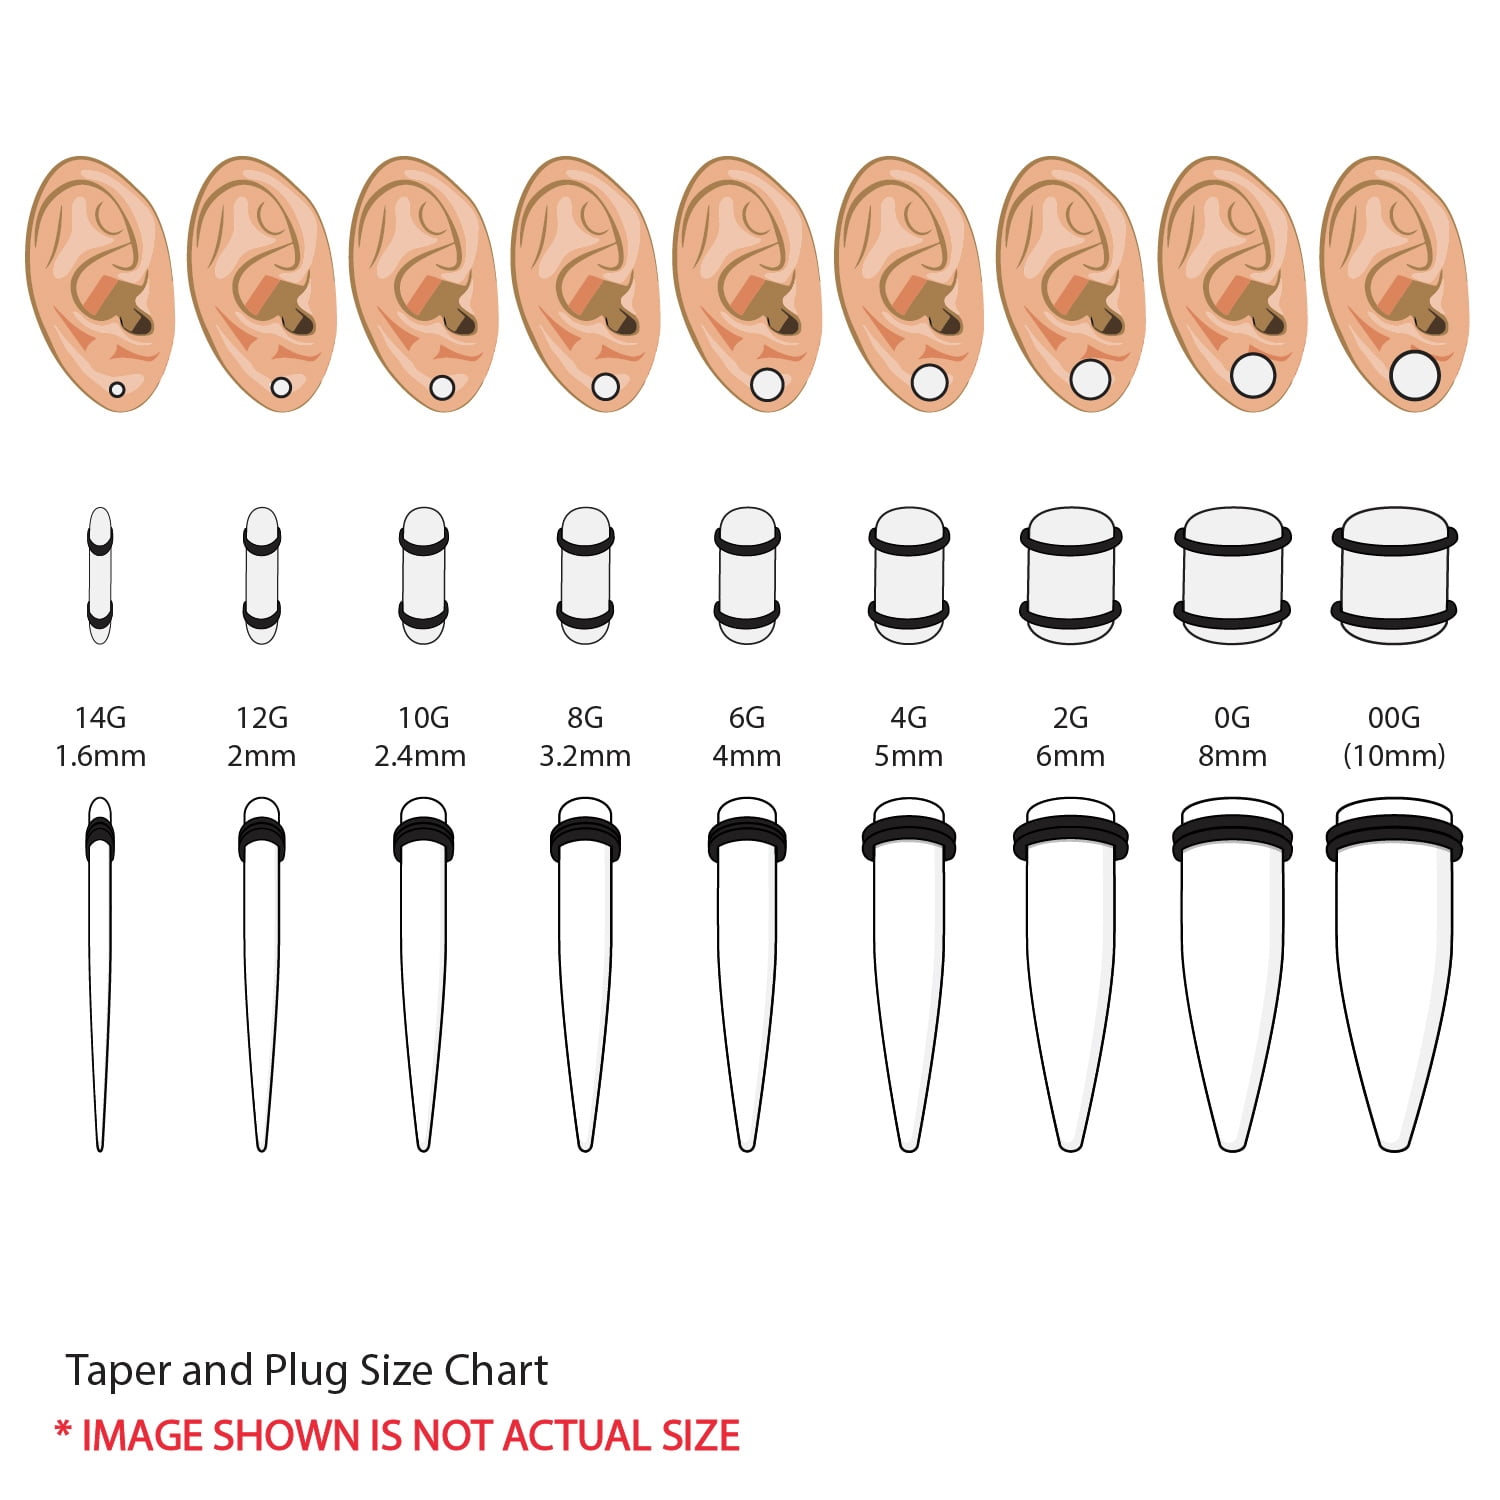 tapers and plugs size chart bodyj4you 54pc gauges kit ear stretching 14g 00...